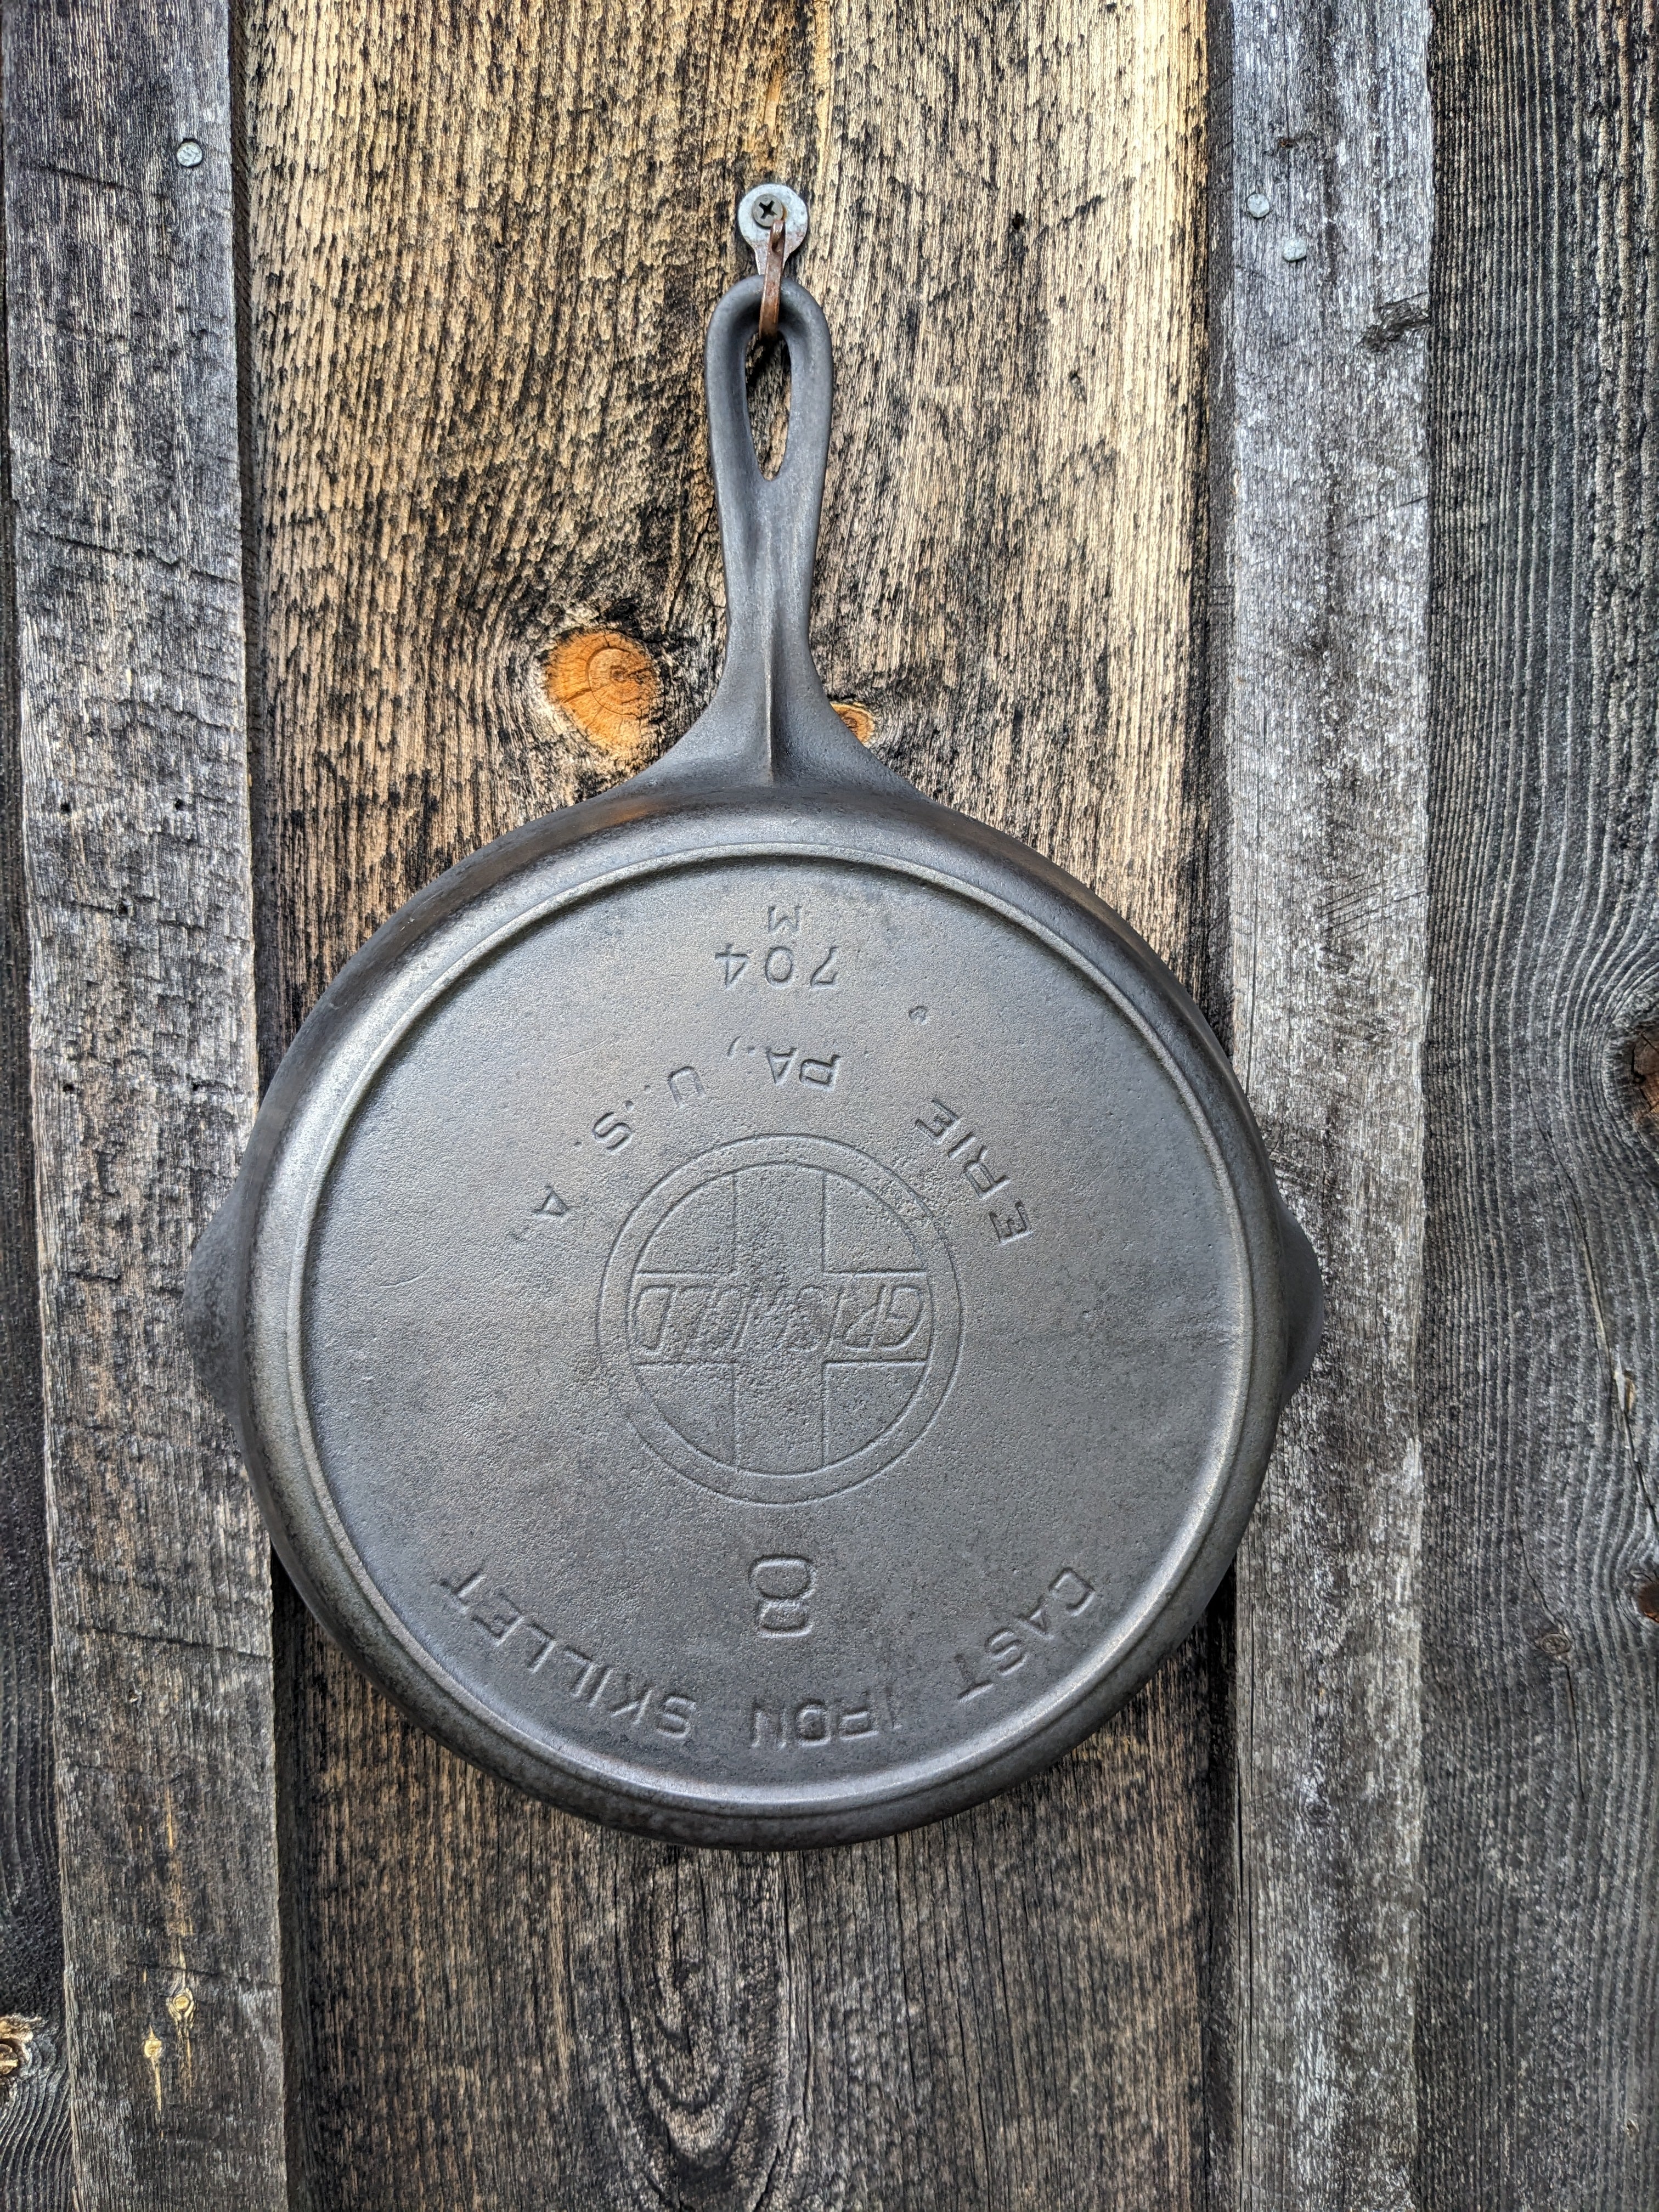 HTF Griswold/Sears Best Made #8 Cast Iron Skillet p/n 1238 - Fully Restored